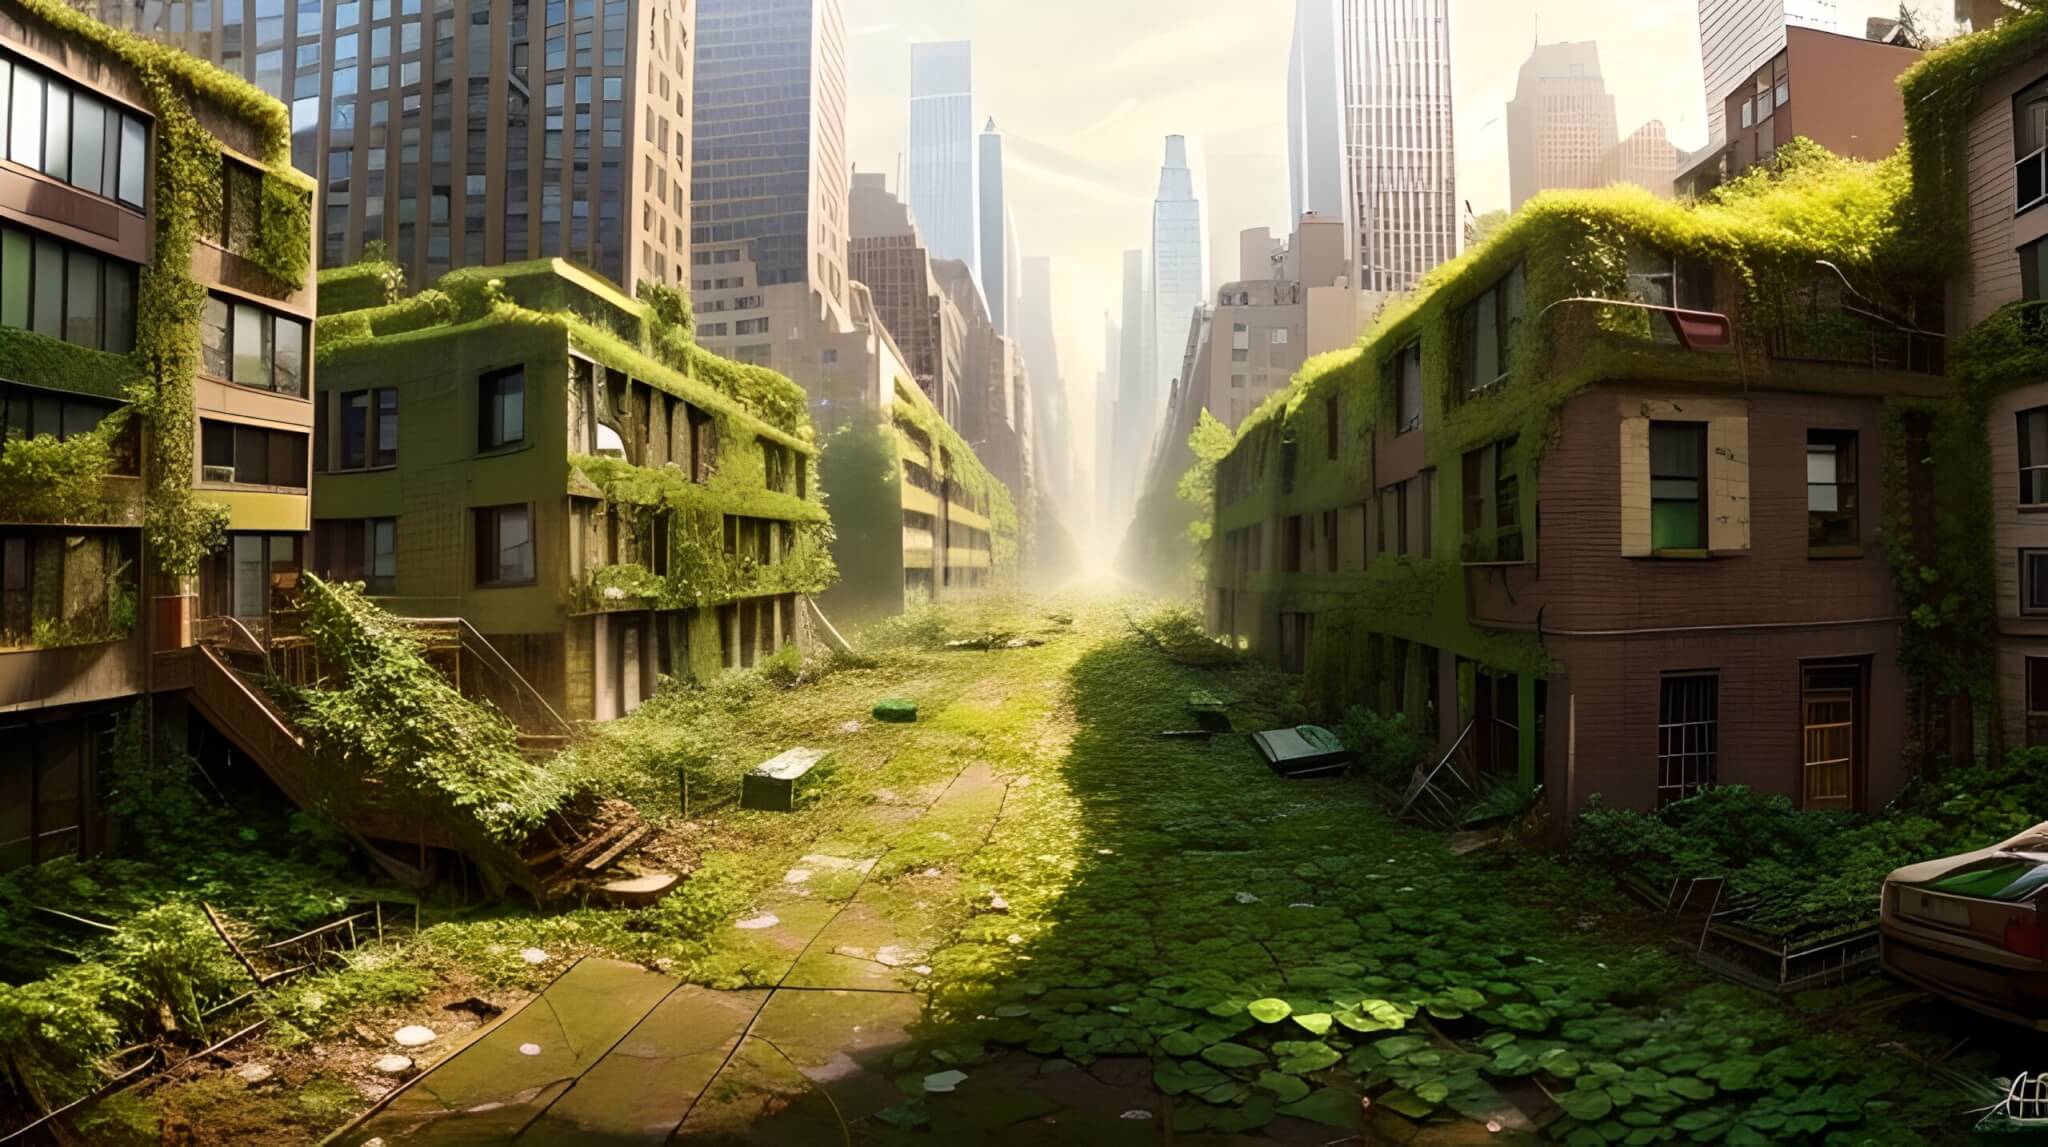 https://studyfinds.org/wp-content/uploads/2023/06/Post-apocalyptic-world-with-buildings-covered-in-plants-scaled.jpeg